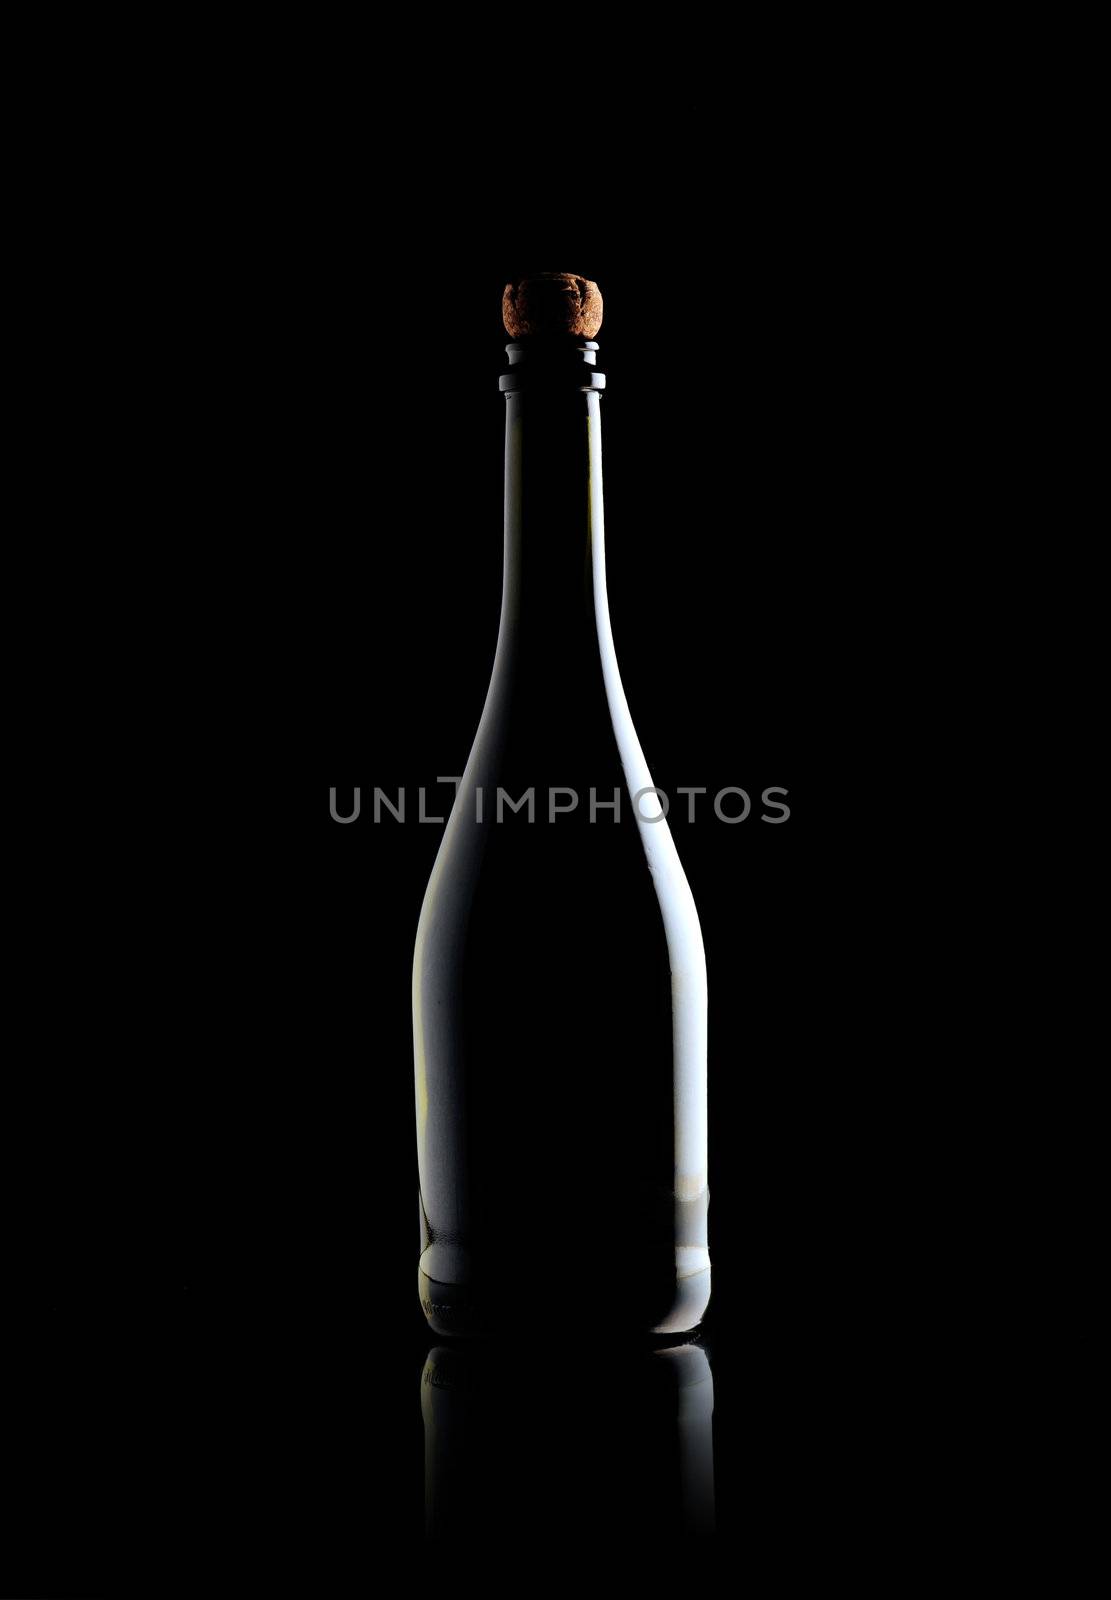 sparkling wine, silhouette on black background